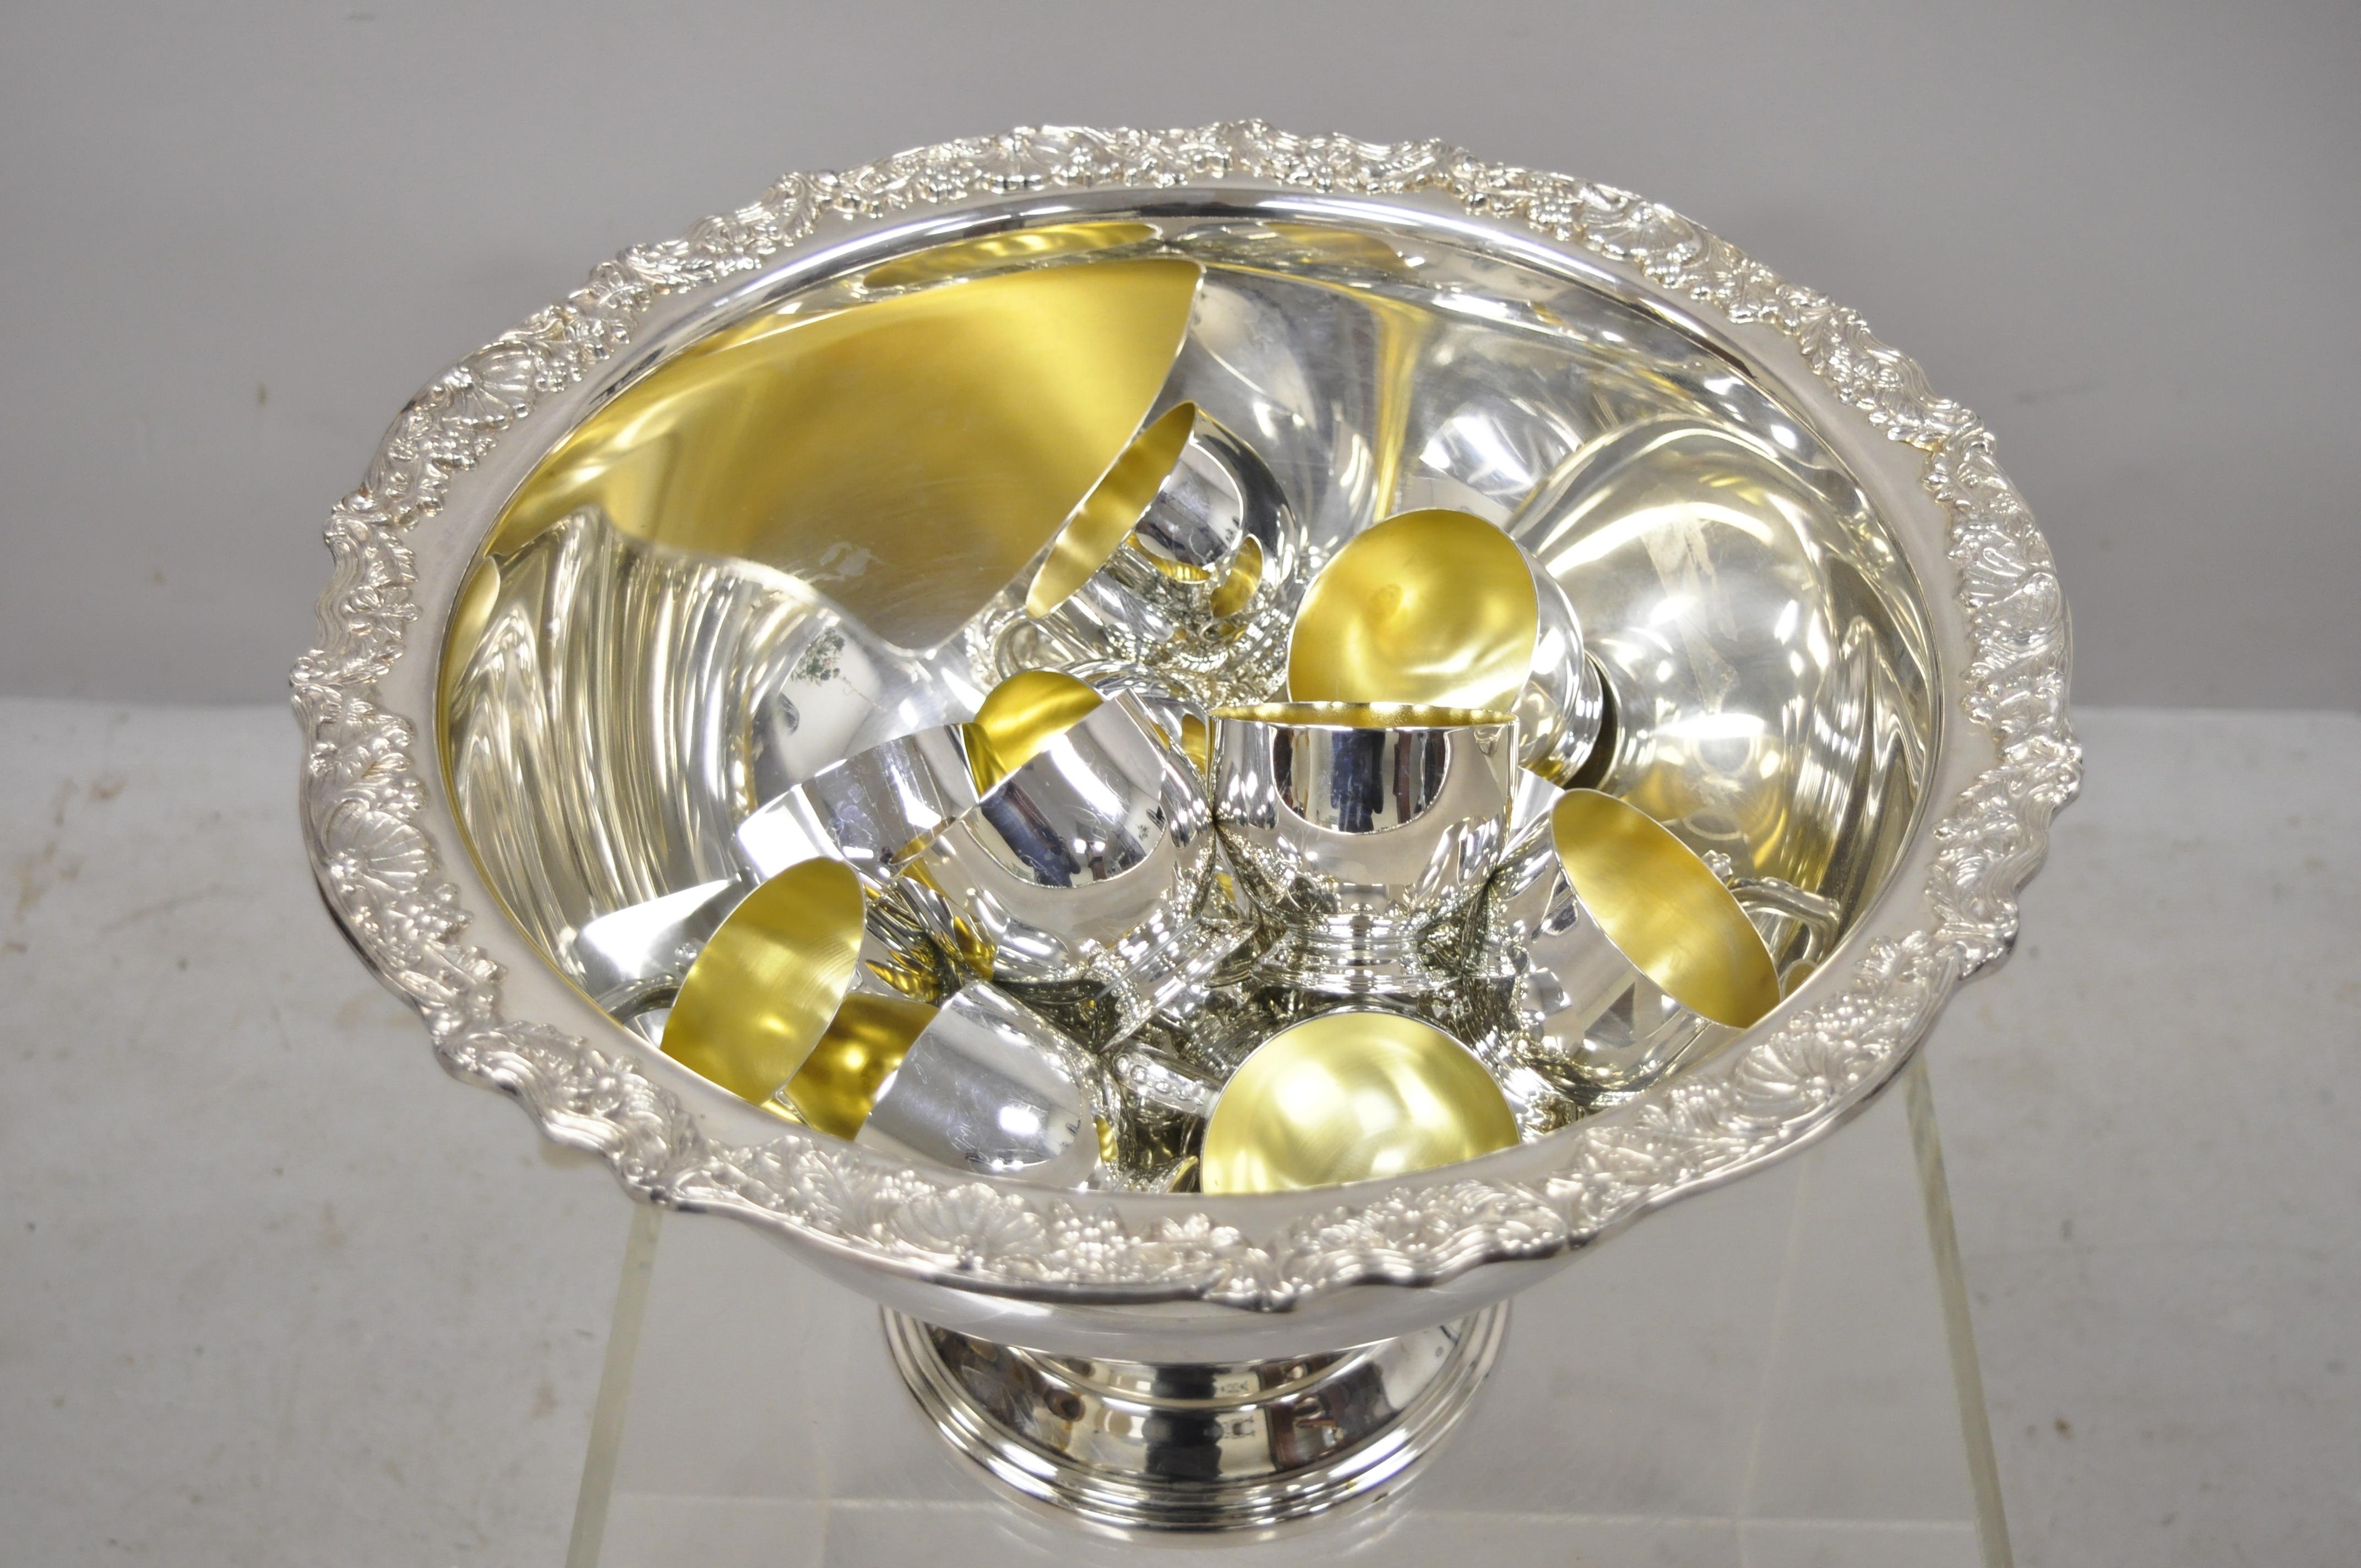 Towle Silver Plated Punch Bowl Set Flower Shell Rim with 12 Cups 1